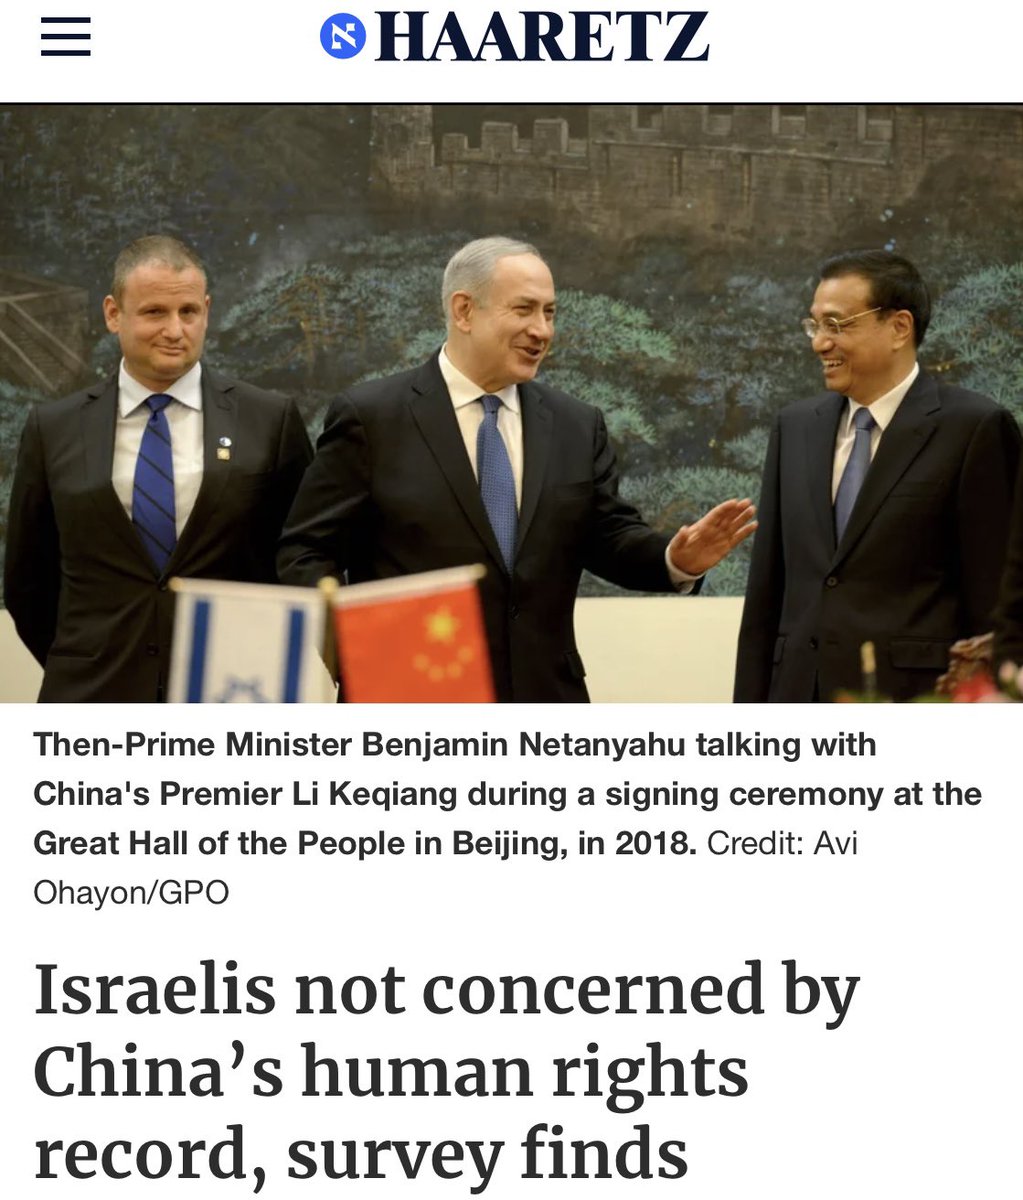 Israel puts Muslims in cages, so why would Israelis care about Chinese concentration camps?